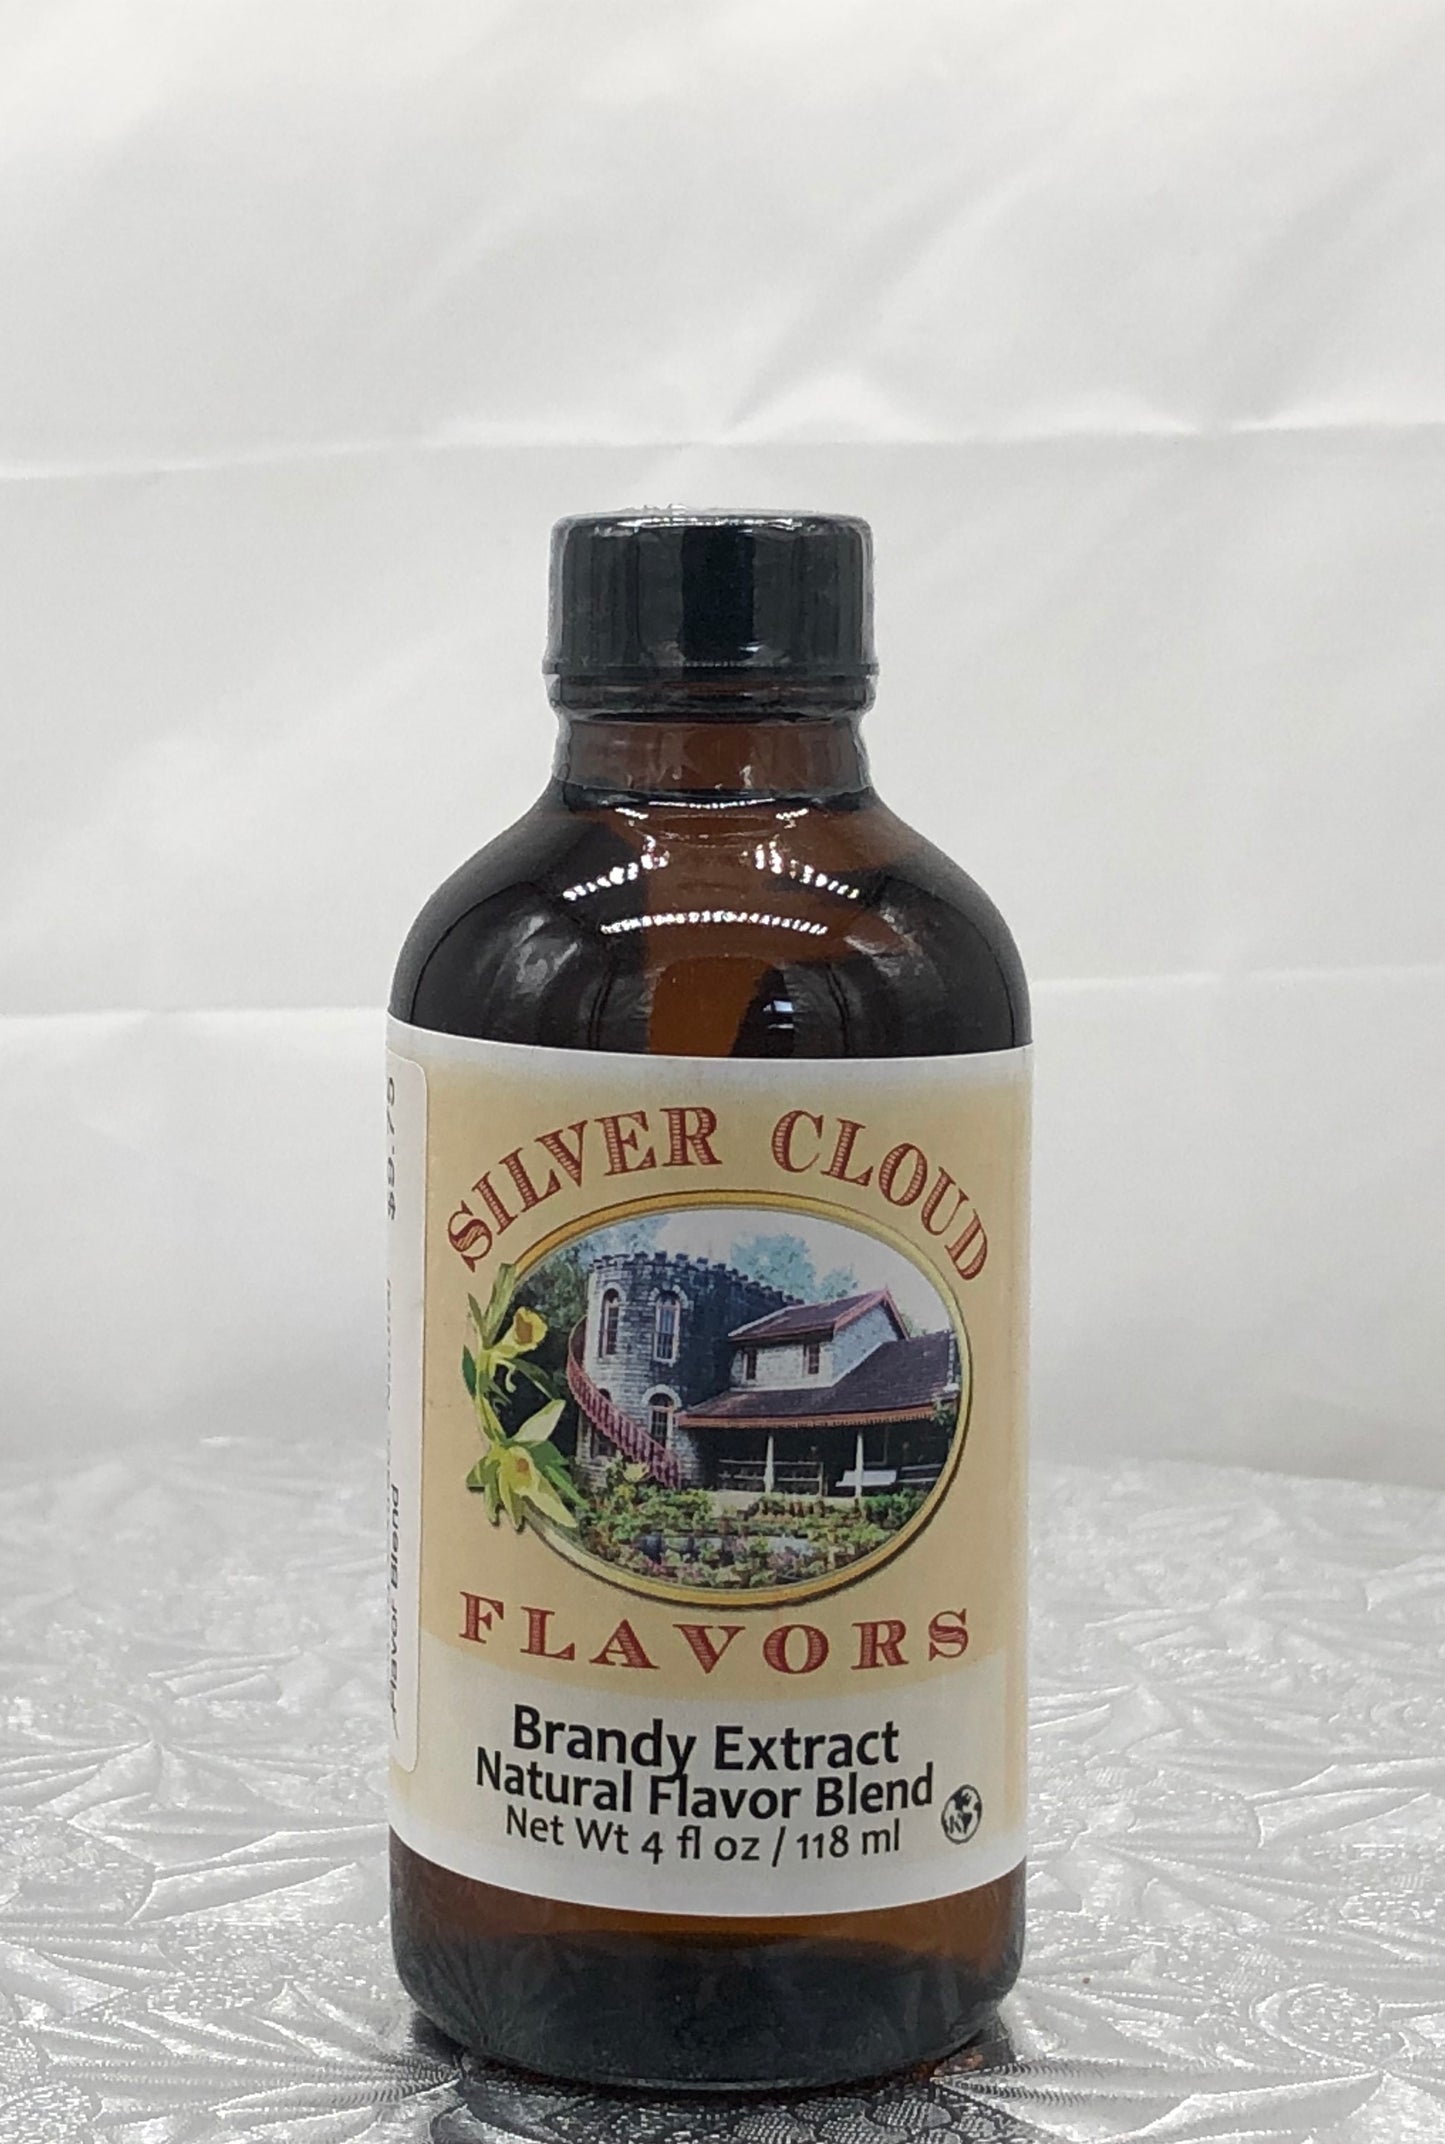 Brandy Extract Natural Flavor Blend, 4oz, Silver Cloud